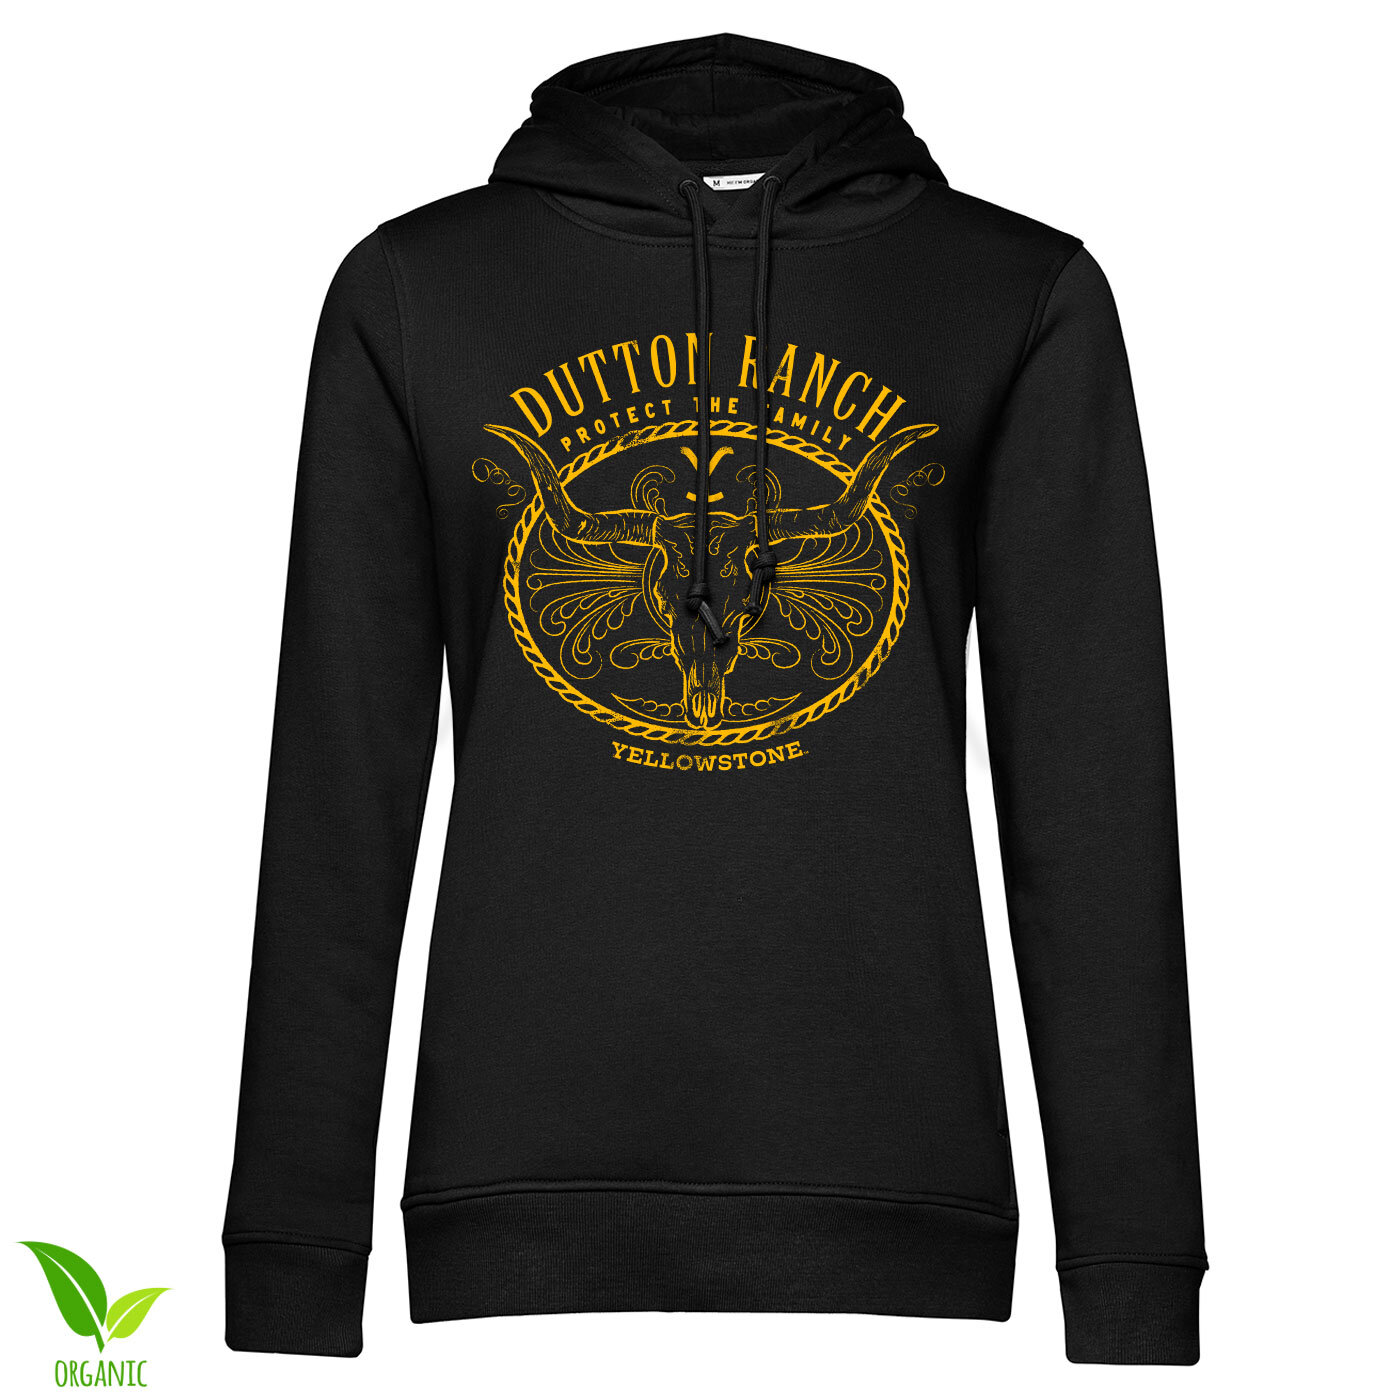 Yellowstone - Protect The Family Girls Hoodie